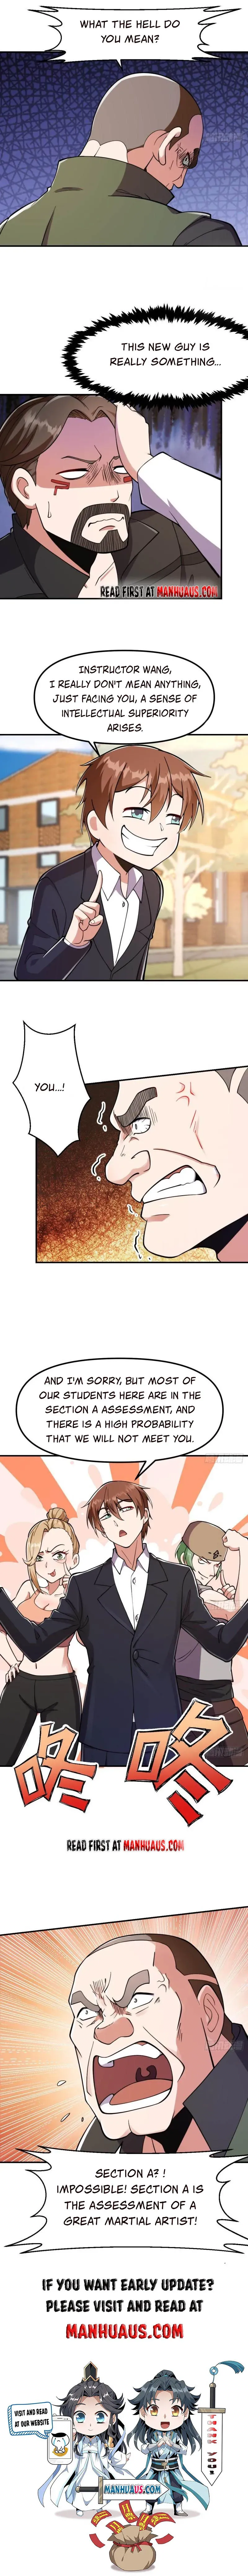 Cultivation Return on Campus Chapter 436 page 3